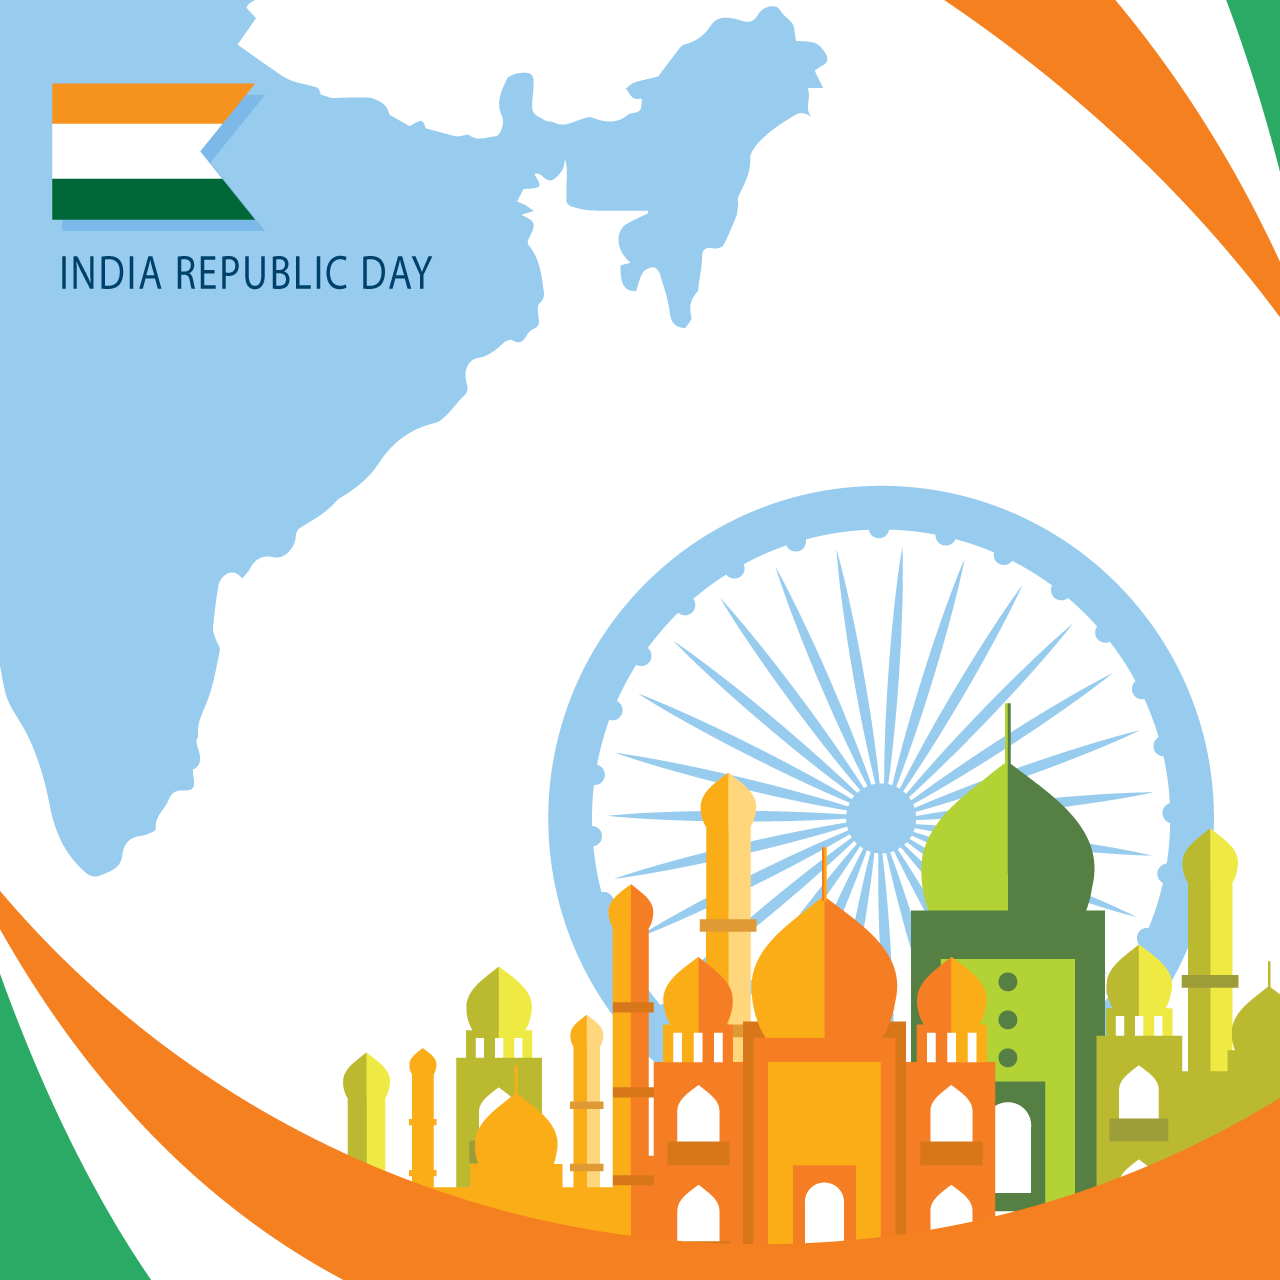 India flag hand drawing sketch indian republic day cartoon illustration image